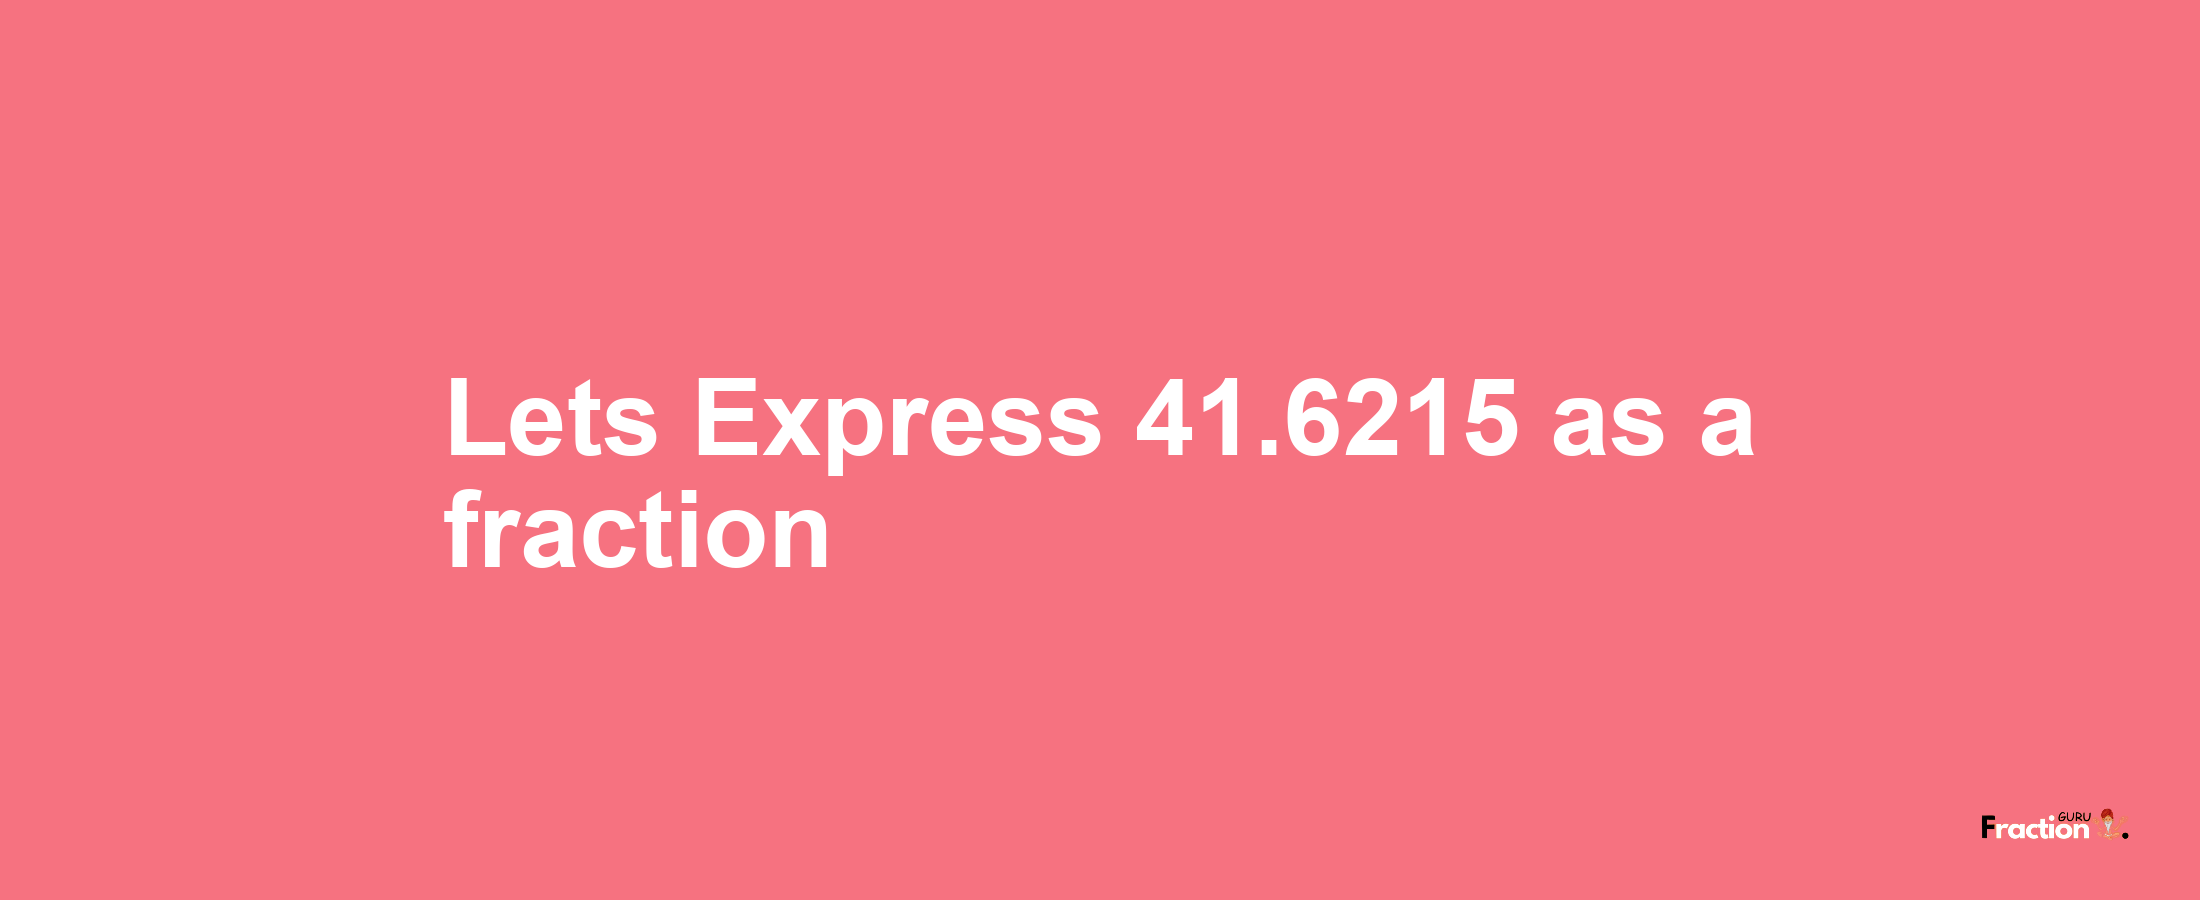 Lets Express 41.6215 as afraction